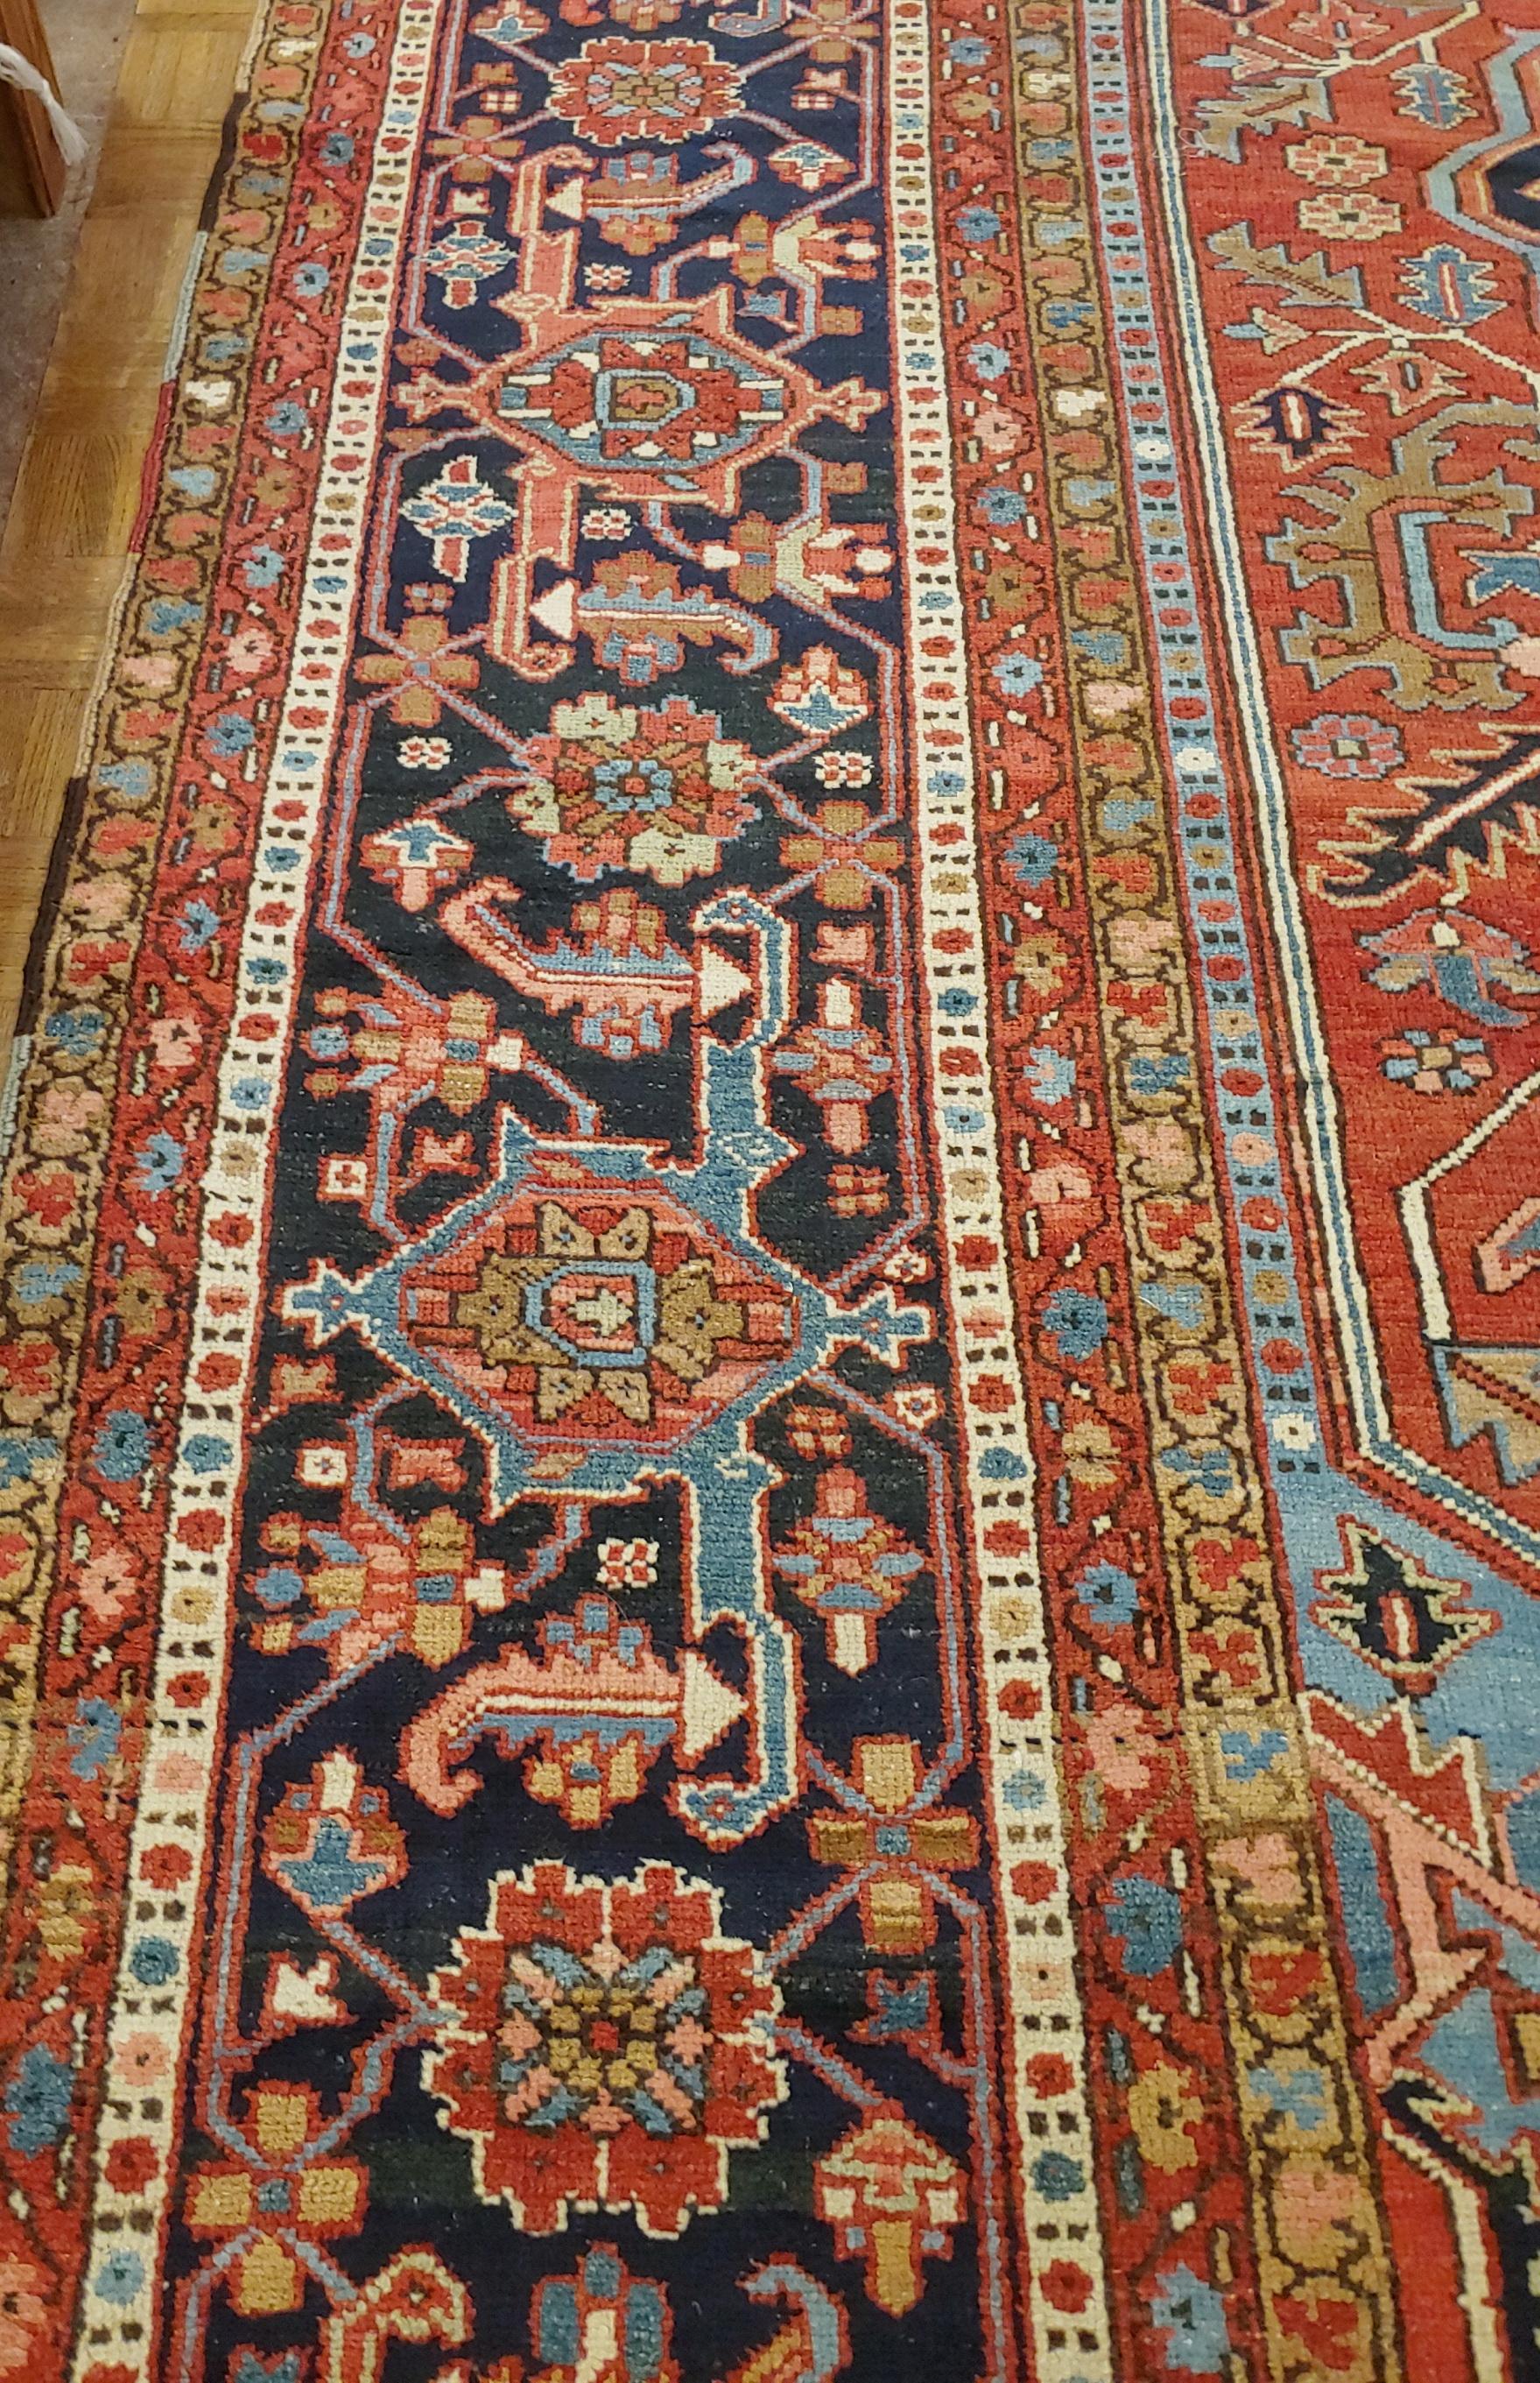 This palace size antique Persian Heriz rug from 1910 is 12-6 x 17-6. It is a Classic Heriz motif with a navy medallion and border on a red/rust field with highly decorative light blue corners.